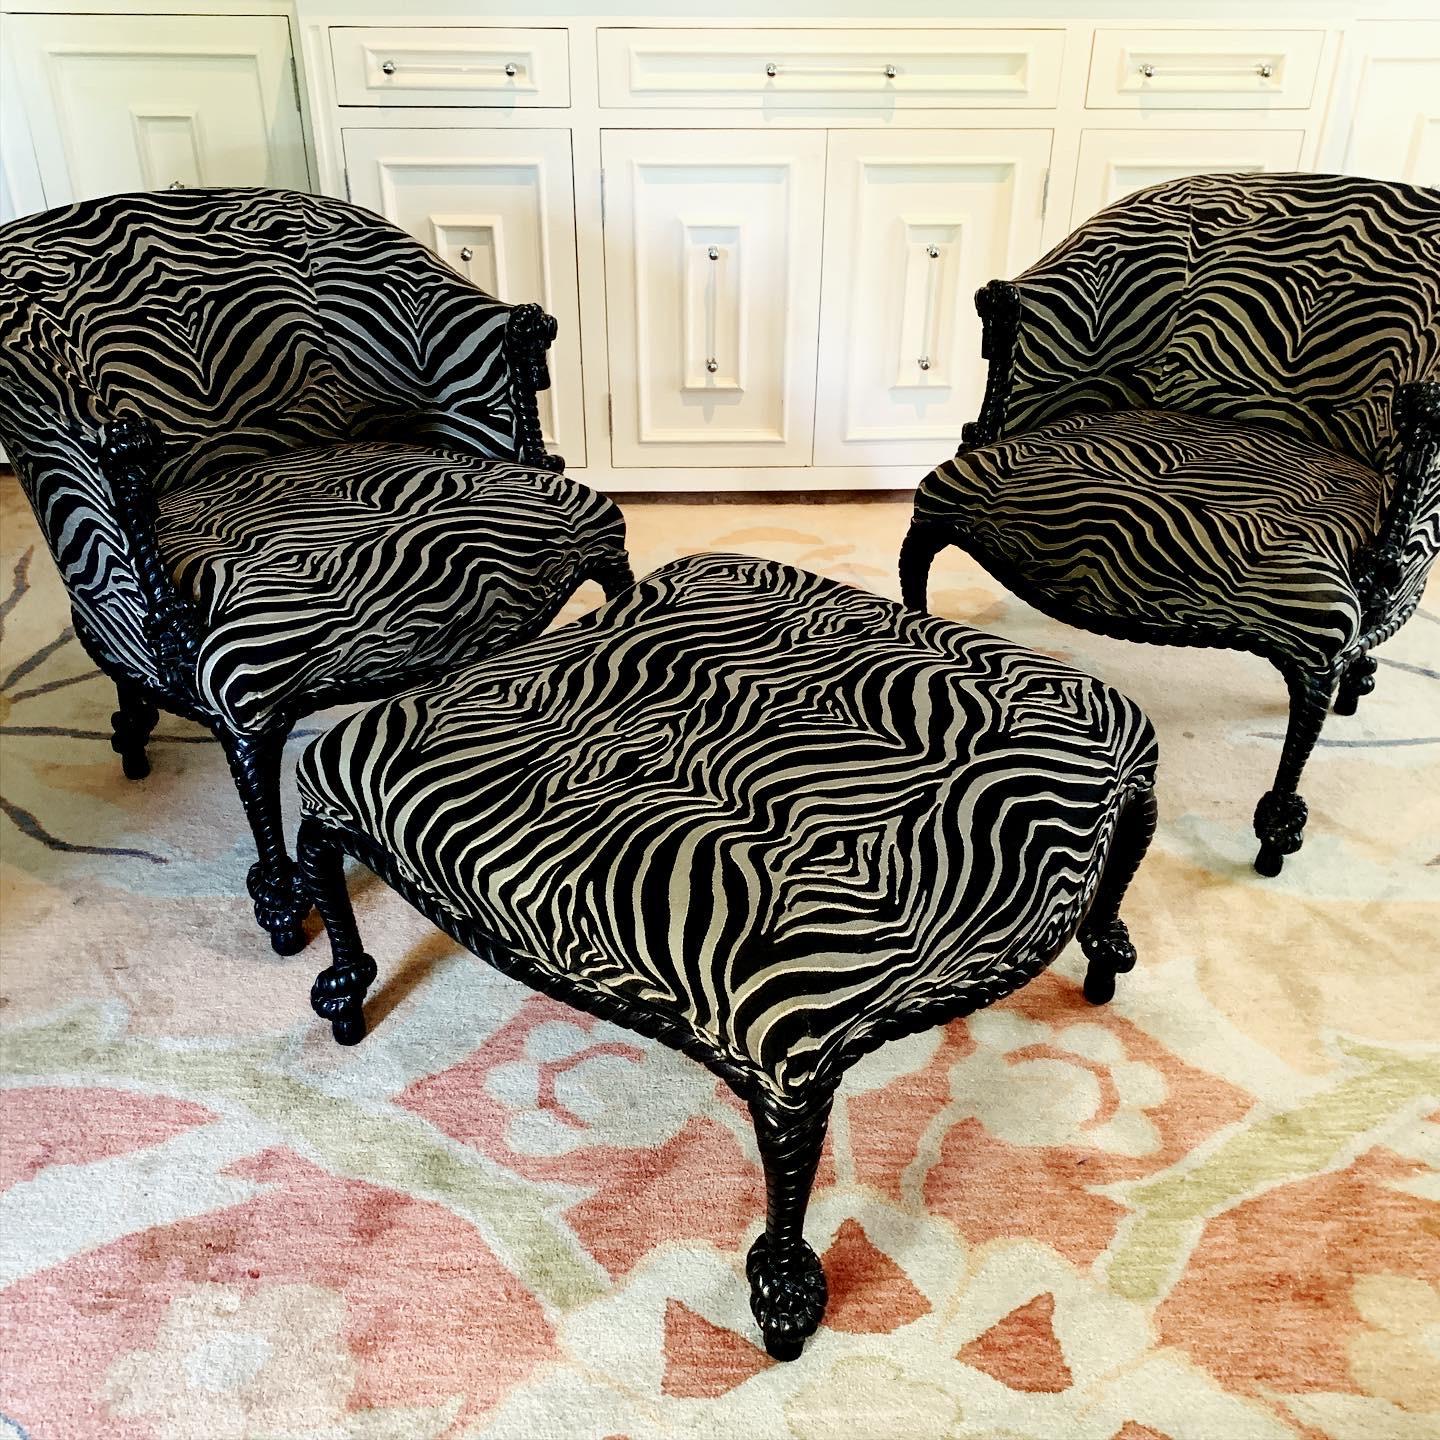 A rare pair of Napoleon lll carved rope and tassel chairs and matching ottoman by Weiman The frames are in black lacquer with zebra upholstery - all hand carved and in great condition. The ottoman is curved to easily place next to the chair creating